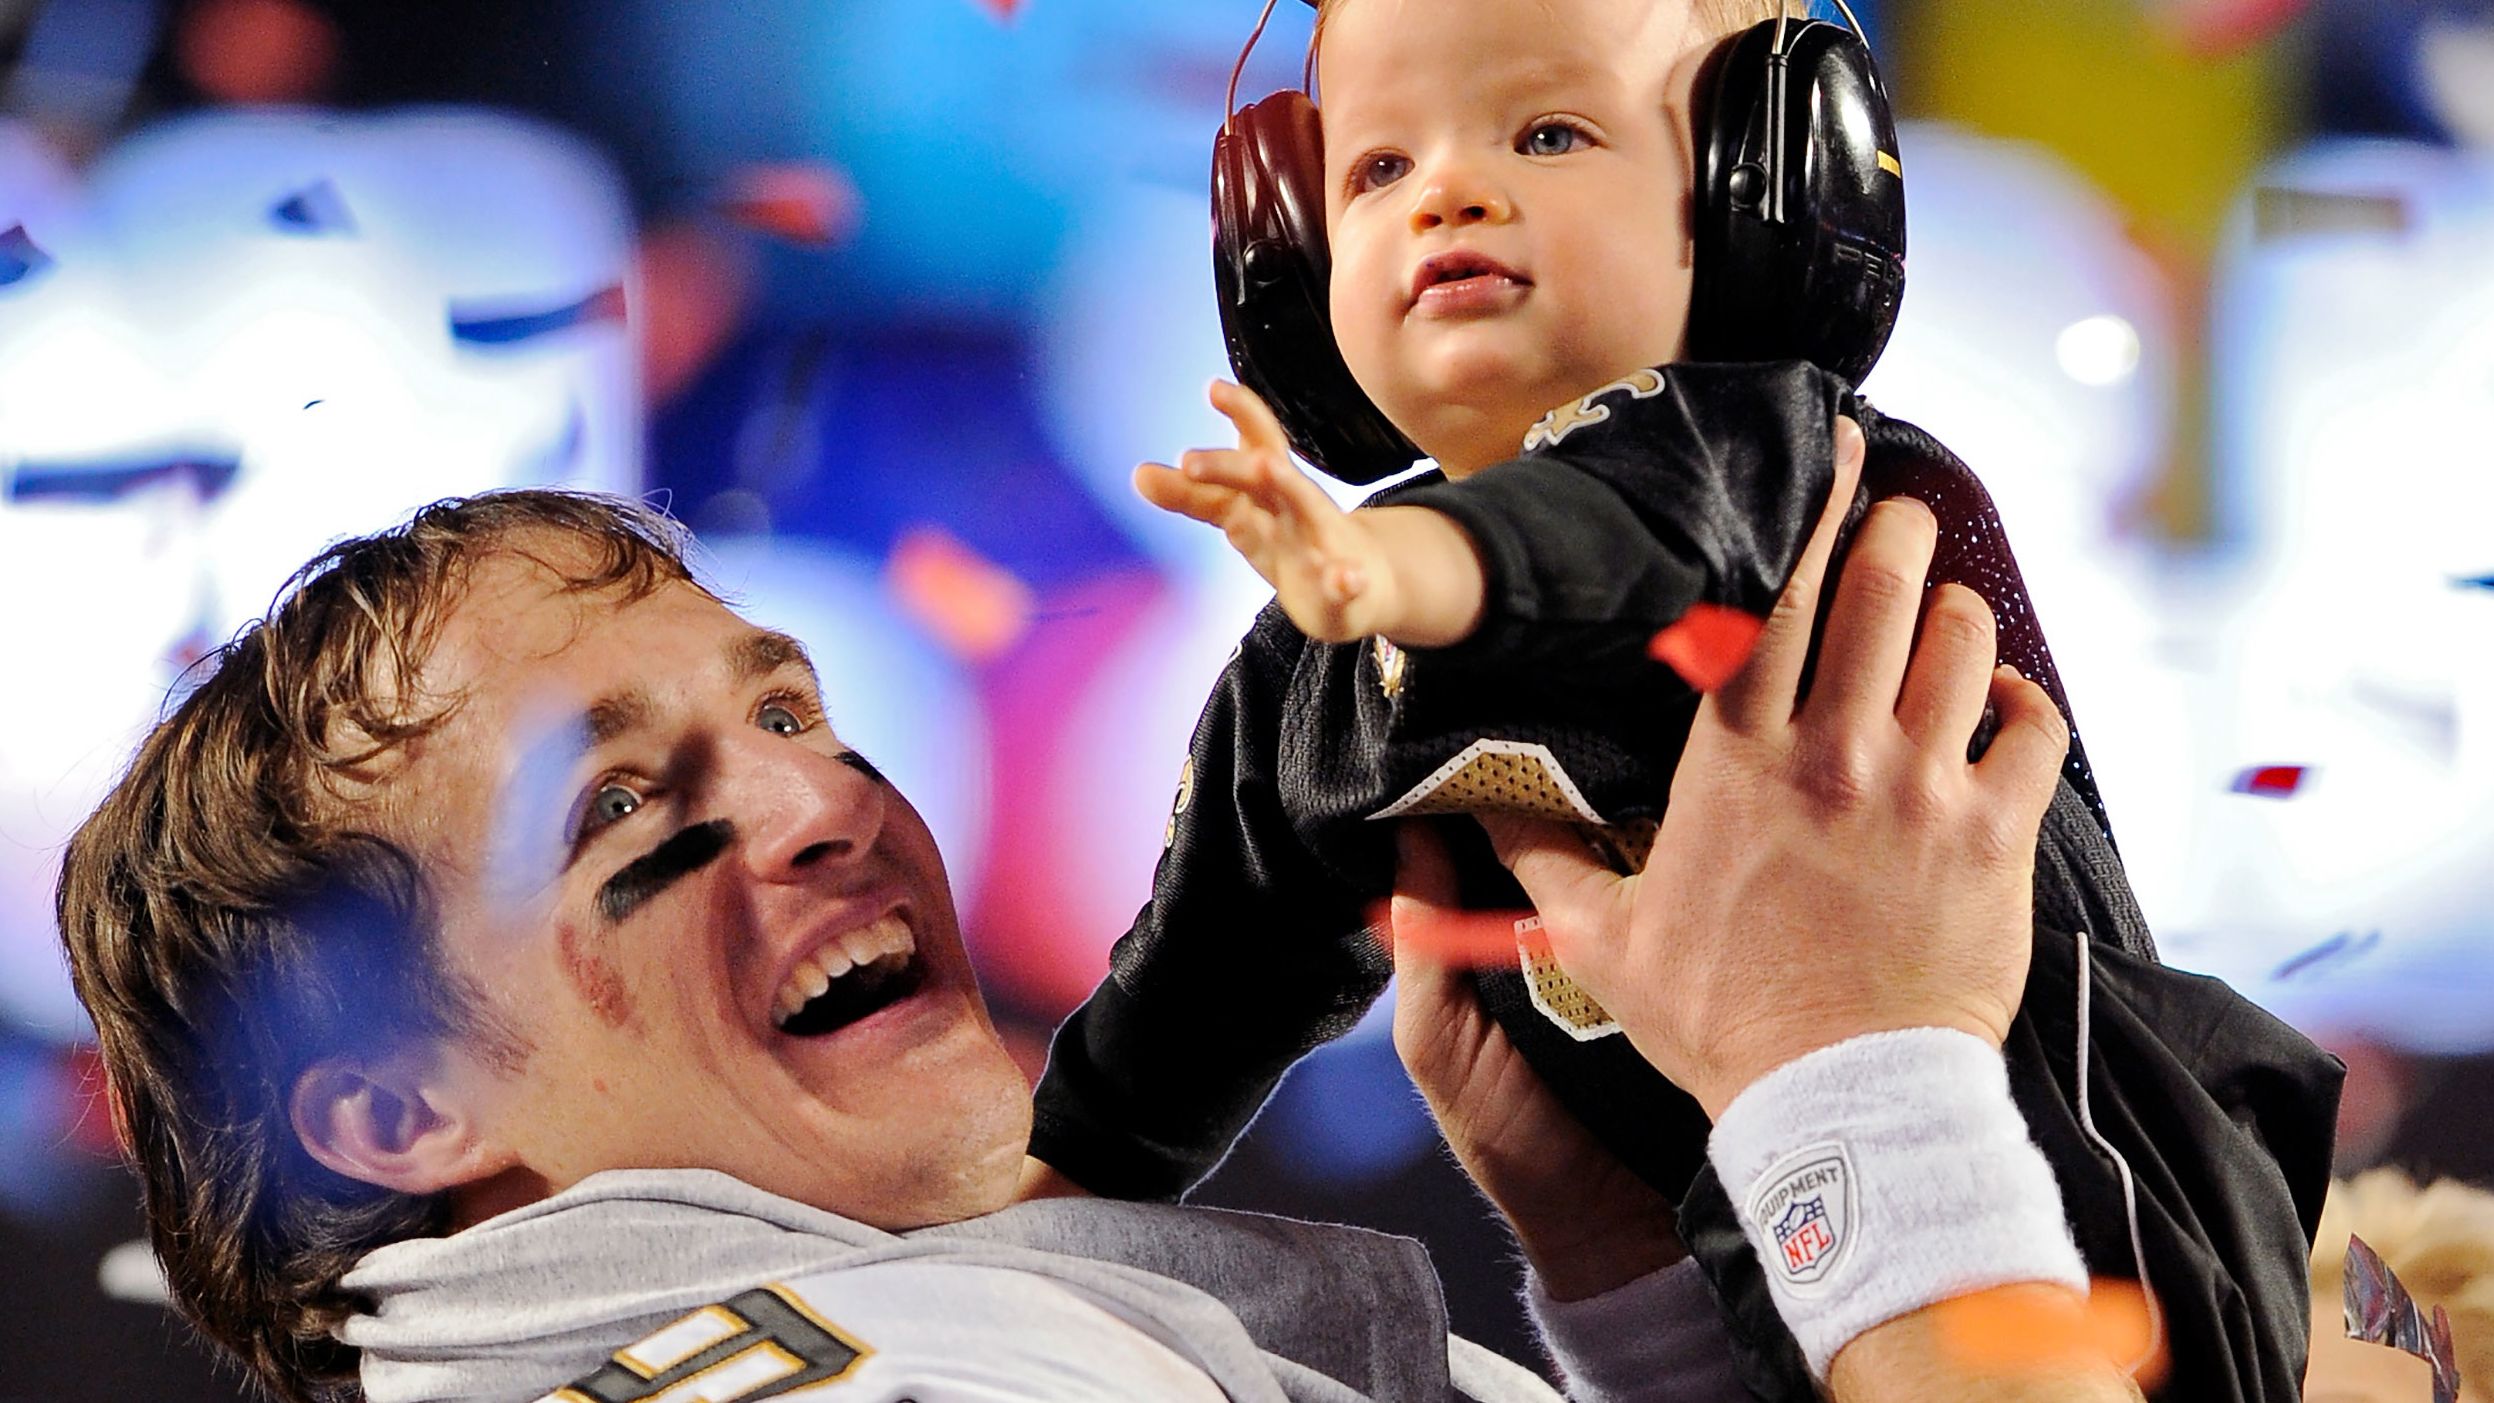 <strong>Super Bowl XLIV (2010):</strong> New Orleans Saints quarterback Drew Brees raises his son Baylen after the Saints beat Indianapolis 31-17 in Super Bowl XLIV. Brees completed 32 of 39 passes for 288 yards and two touchdowns.